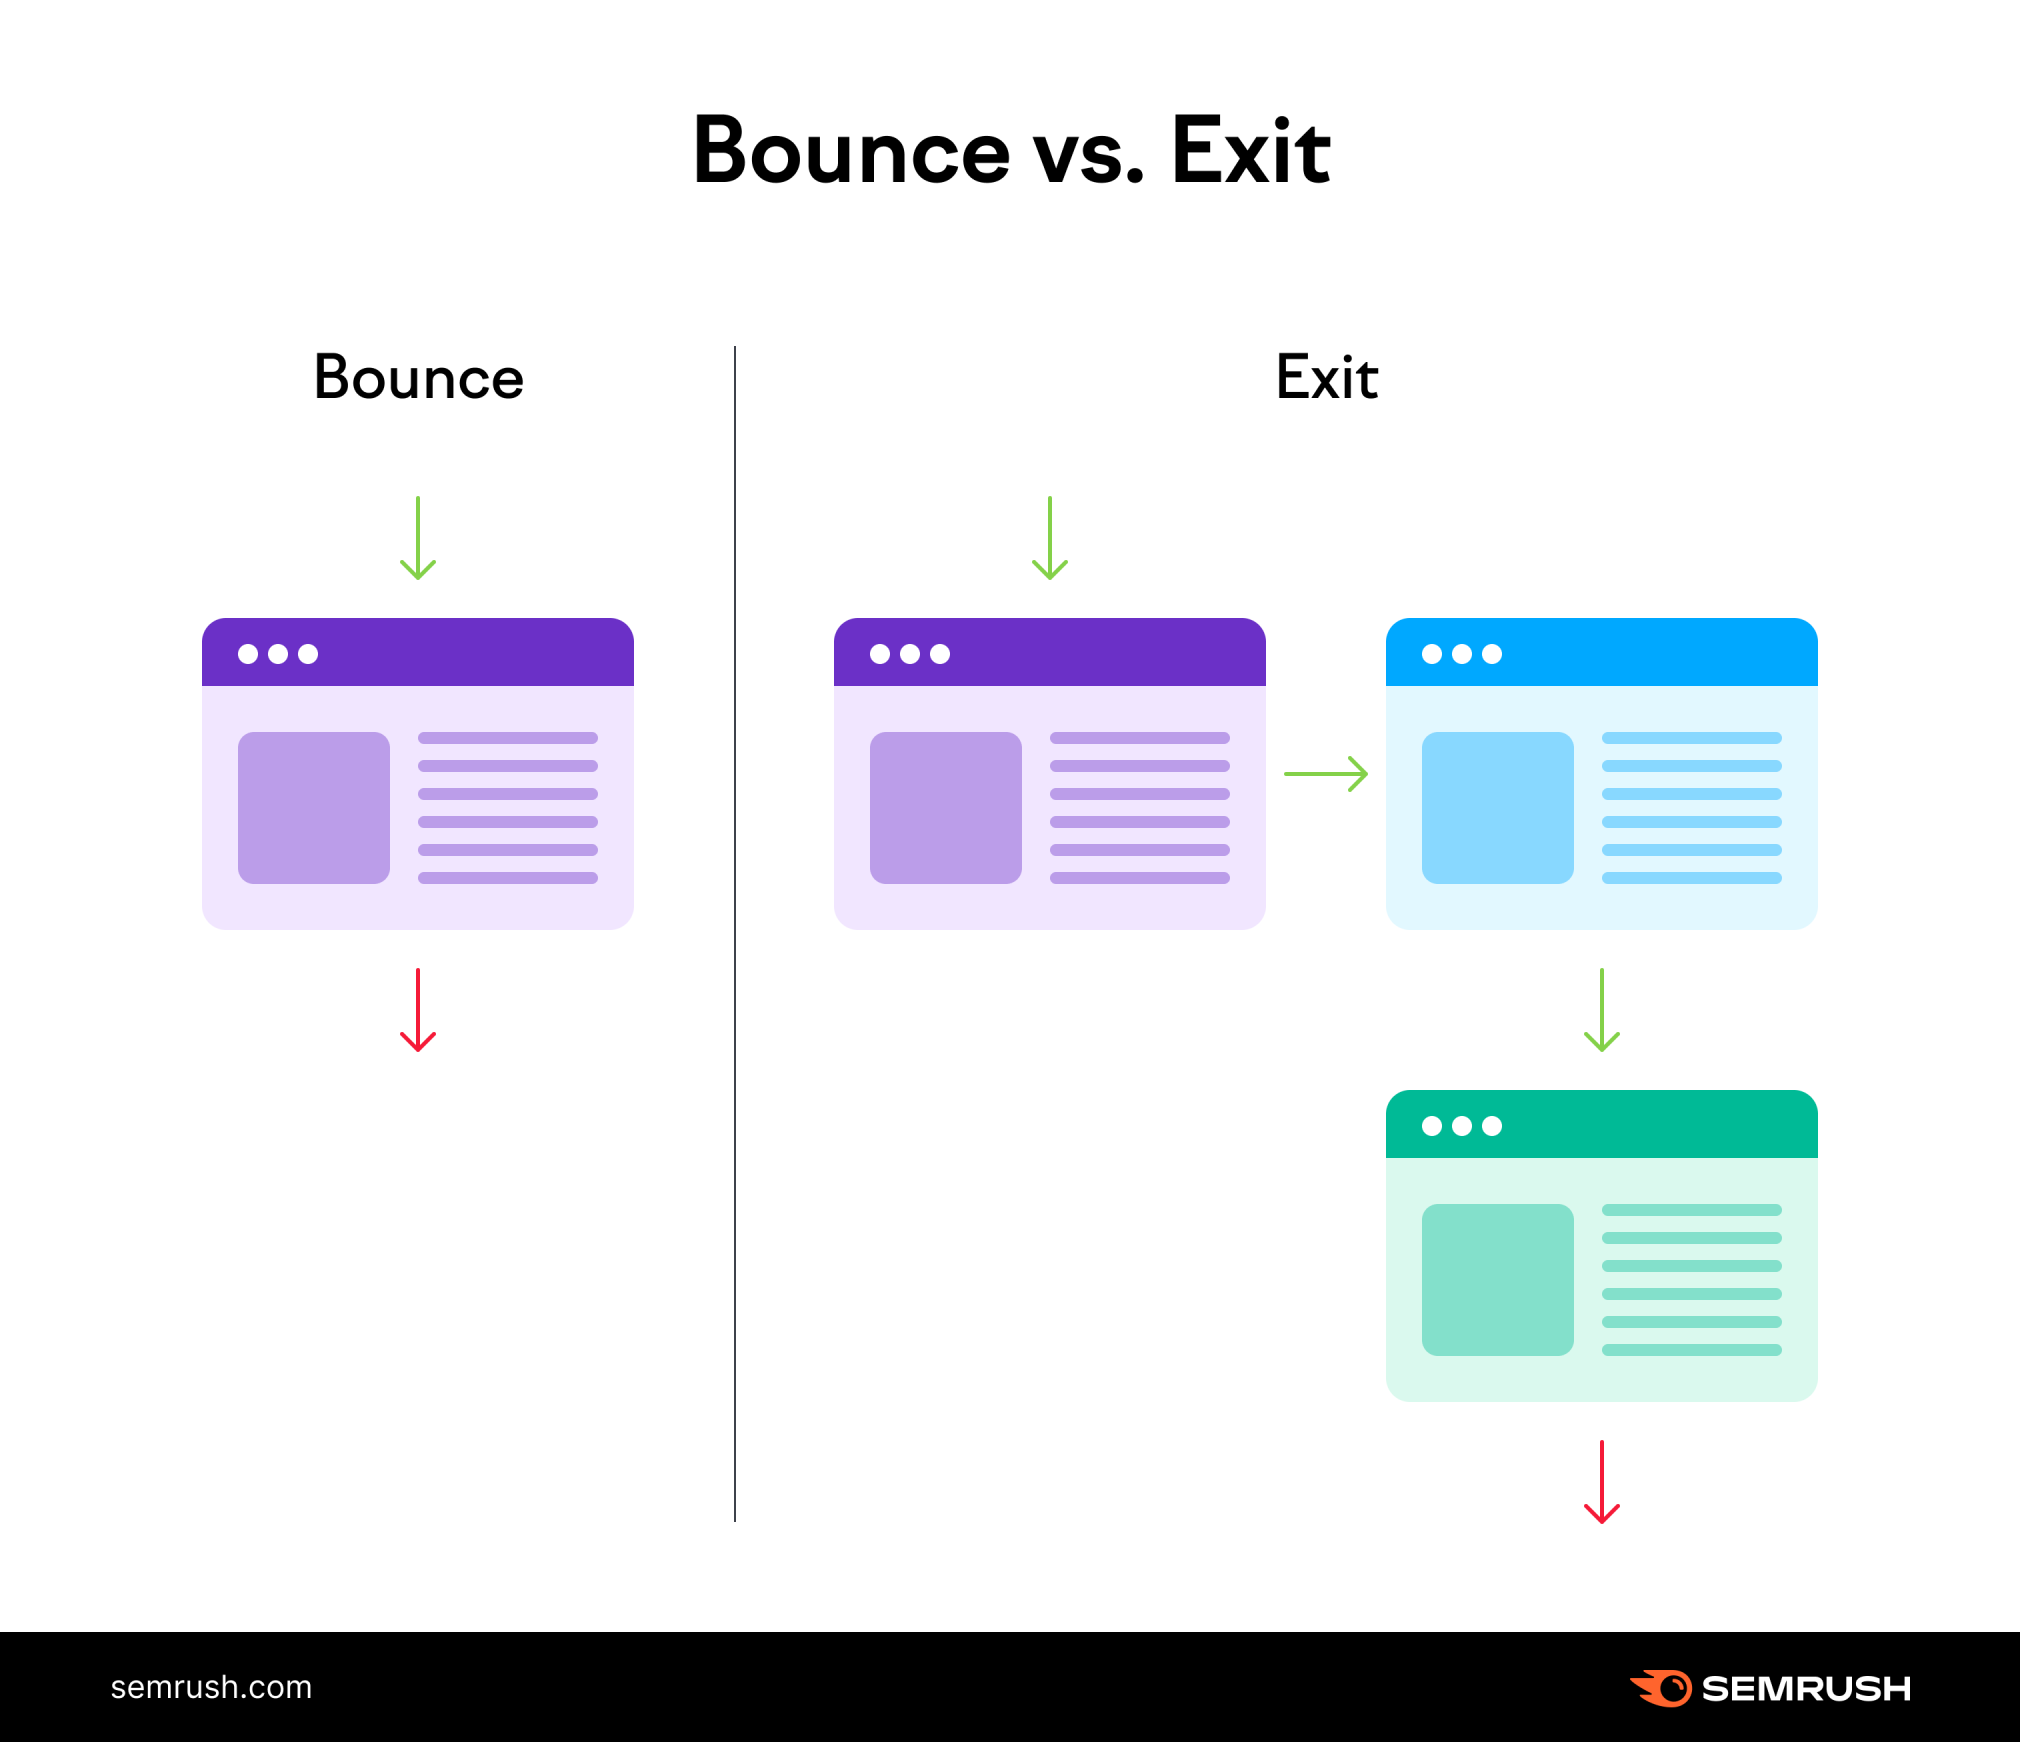 Bounce vs exit rate